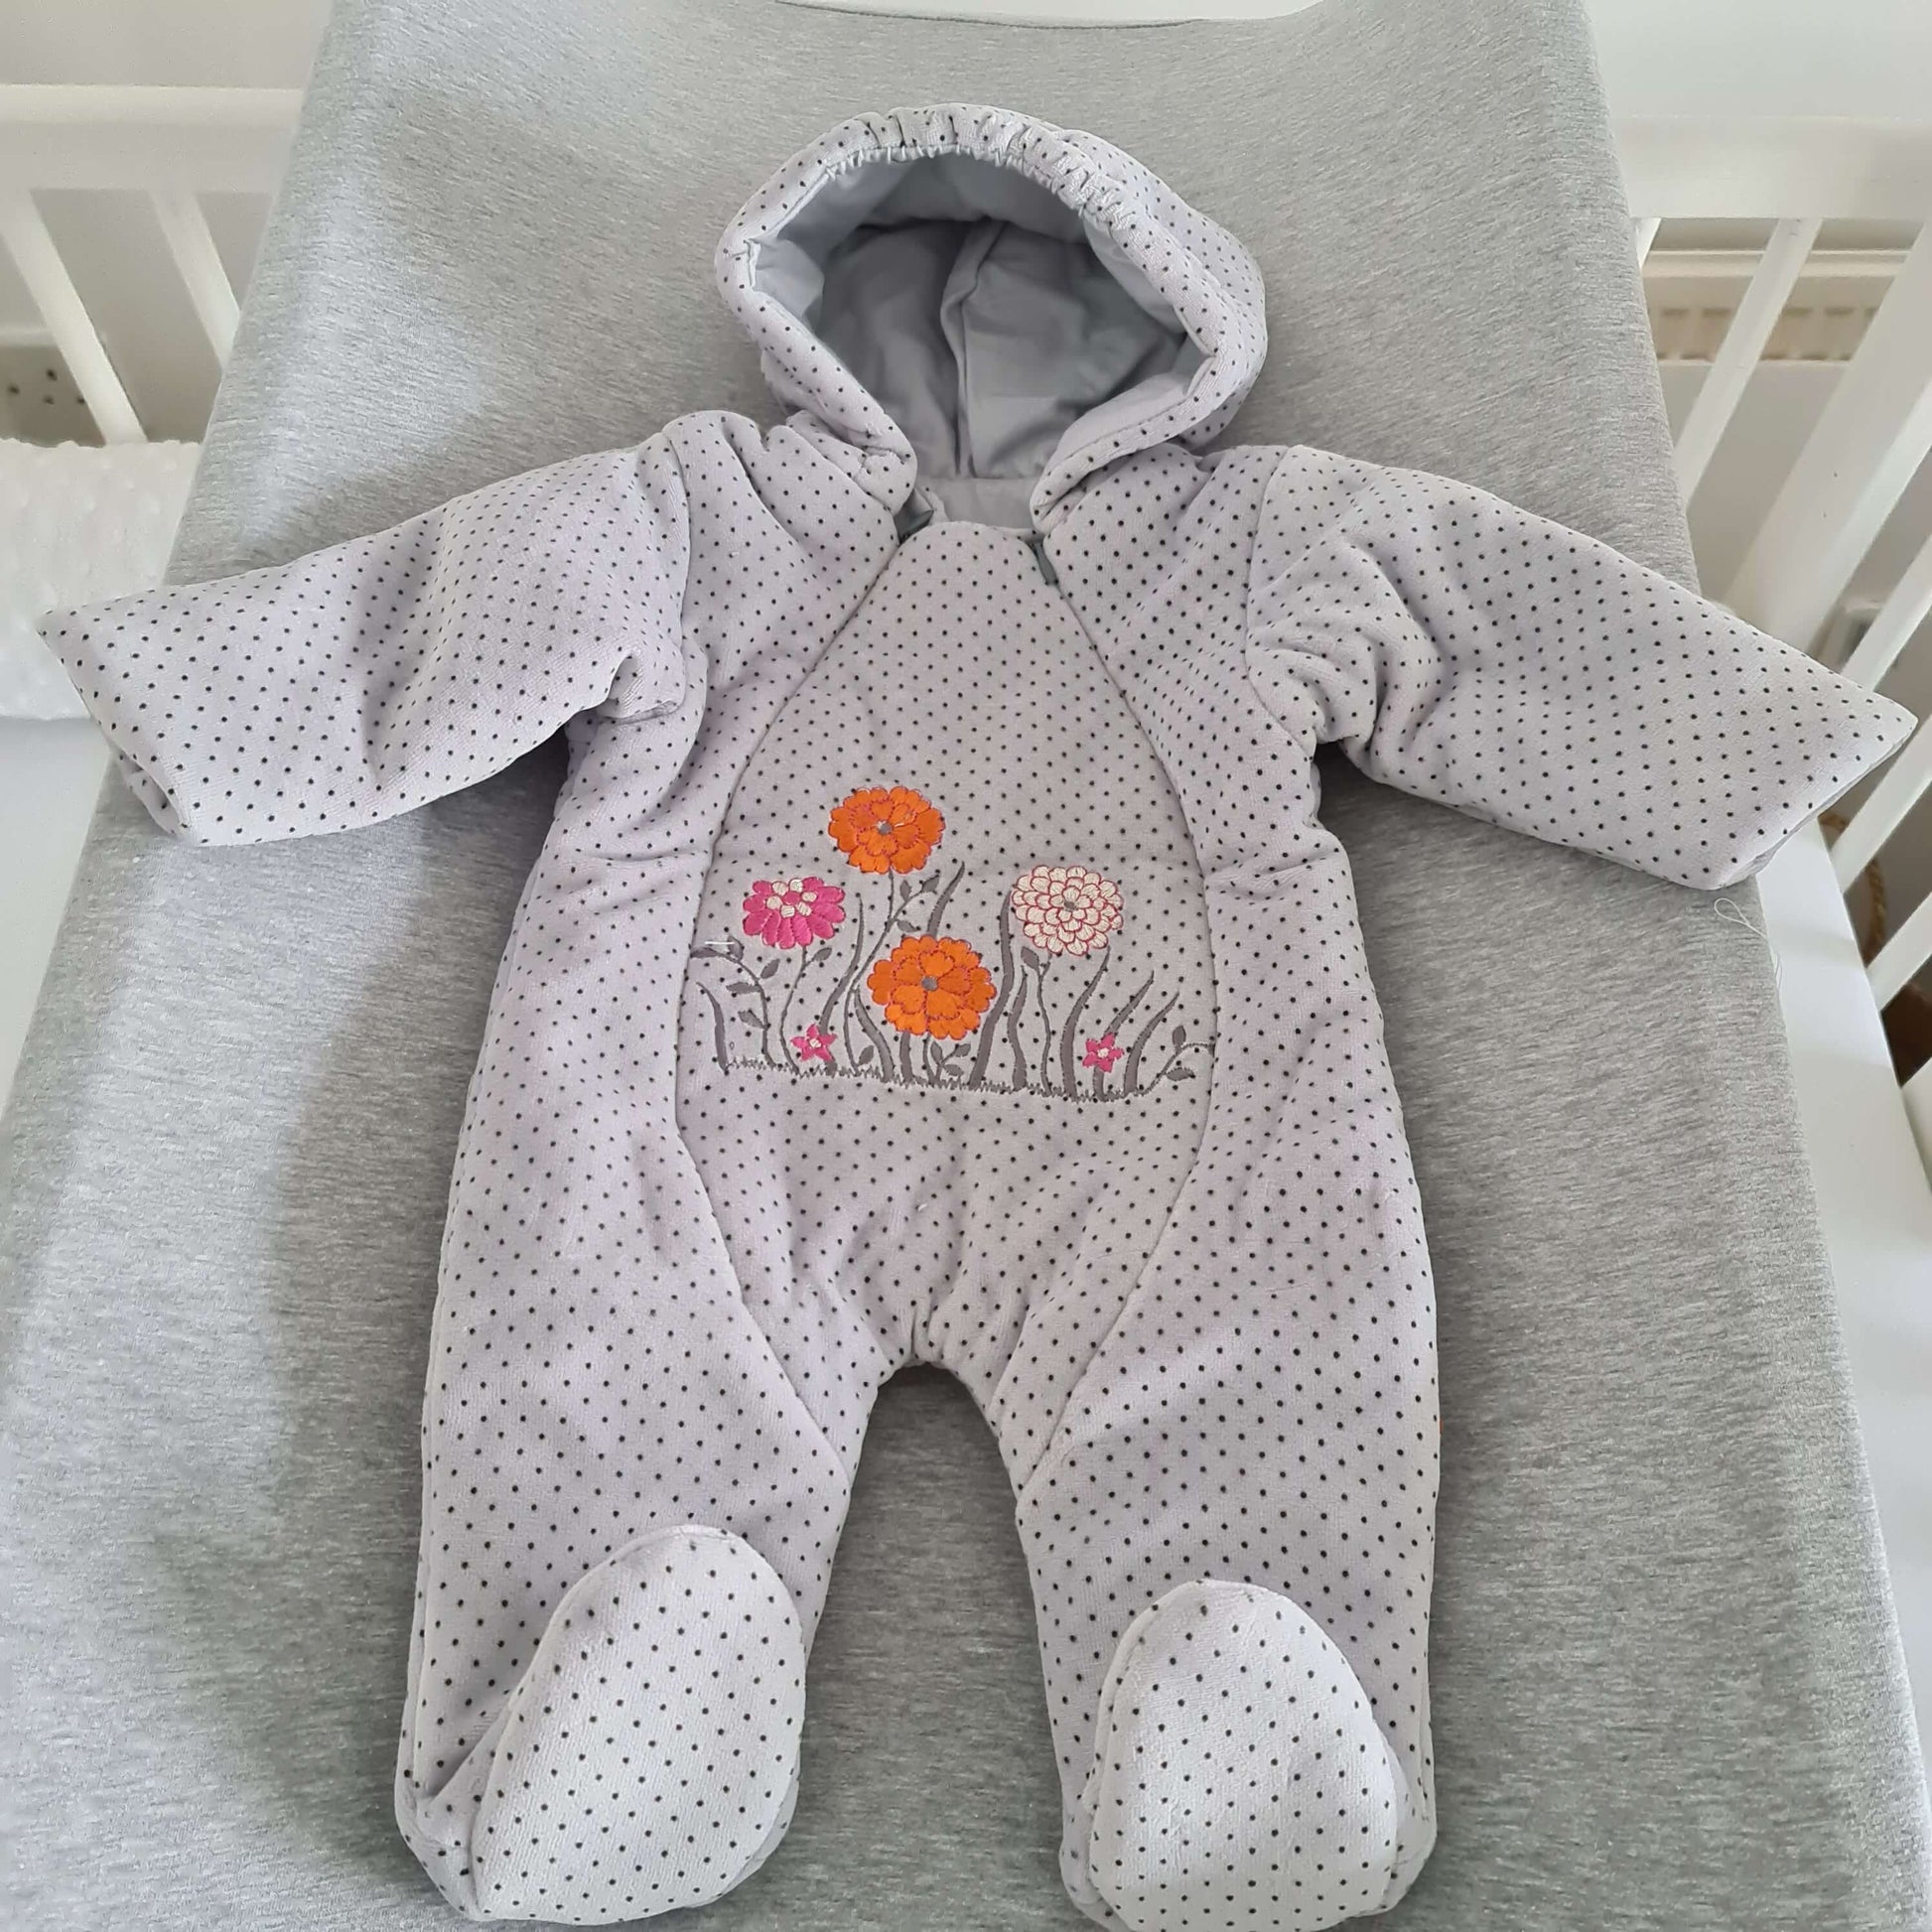 winter suits for baby girl 0-3 months 3-6 months